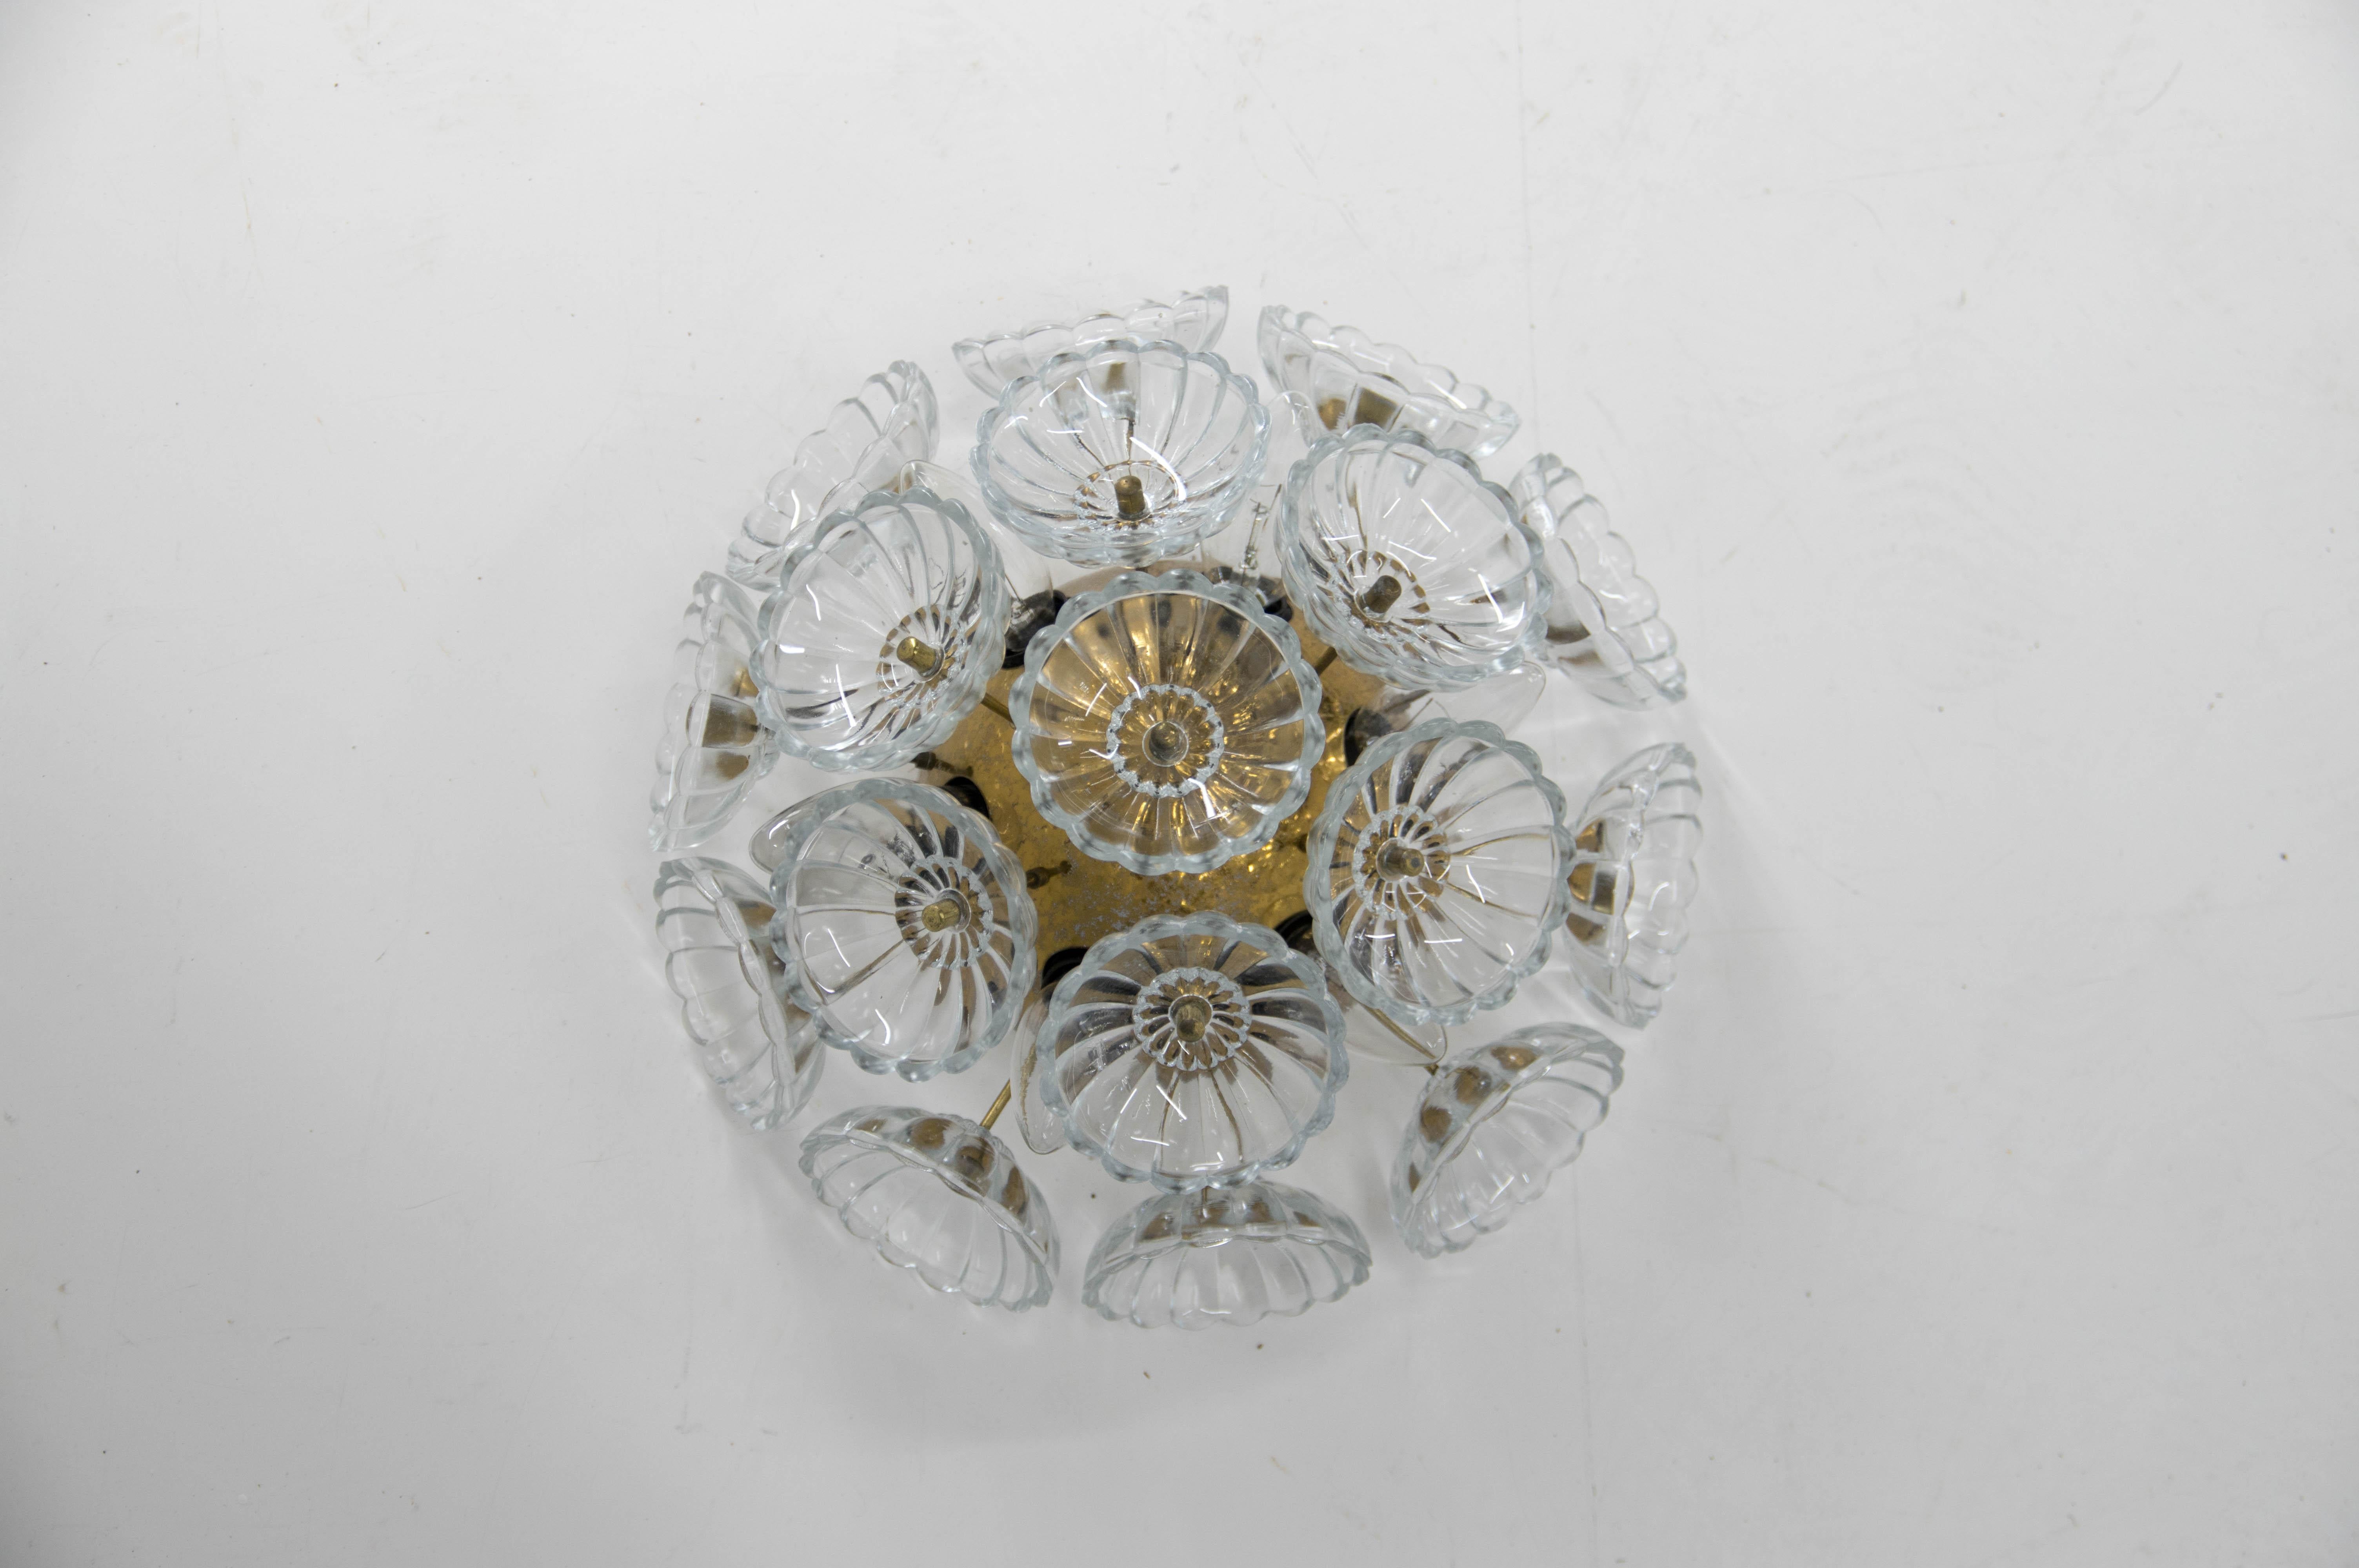 Elegant dandelion wall light or flush mount ceiling light. Lamp has seventeen glass flowers on a brass-plated metal frame. Manufactured by VEB, Germany in the 1960s. Labeled.
Glass in perfect condition.
Brass with age patina
6x40W, E12-E14